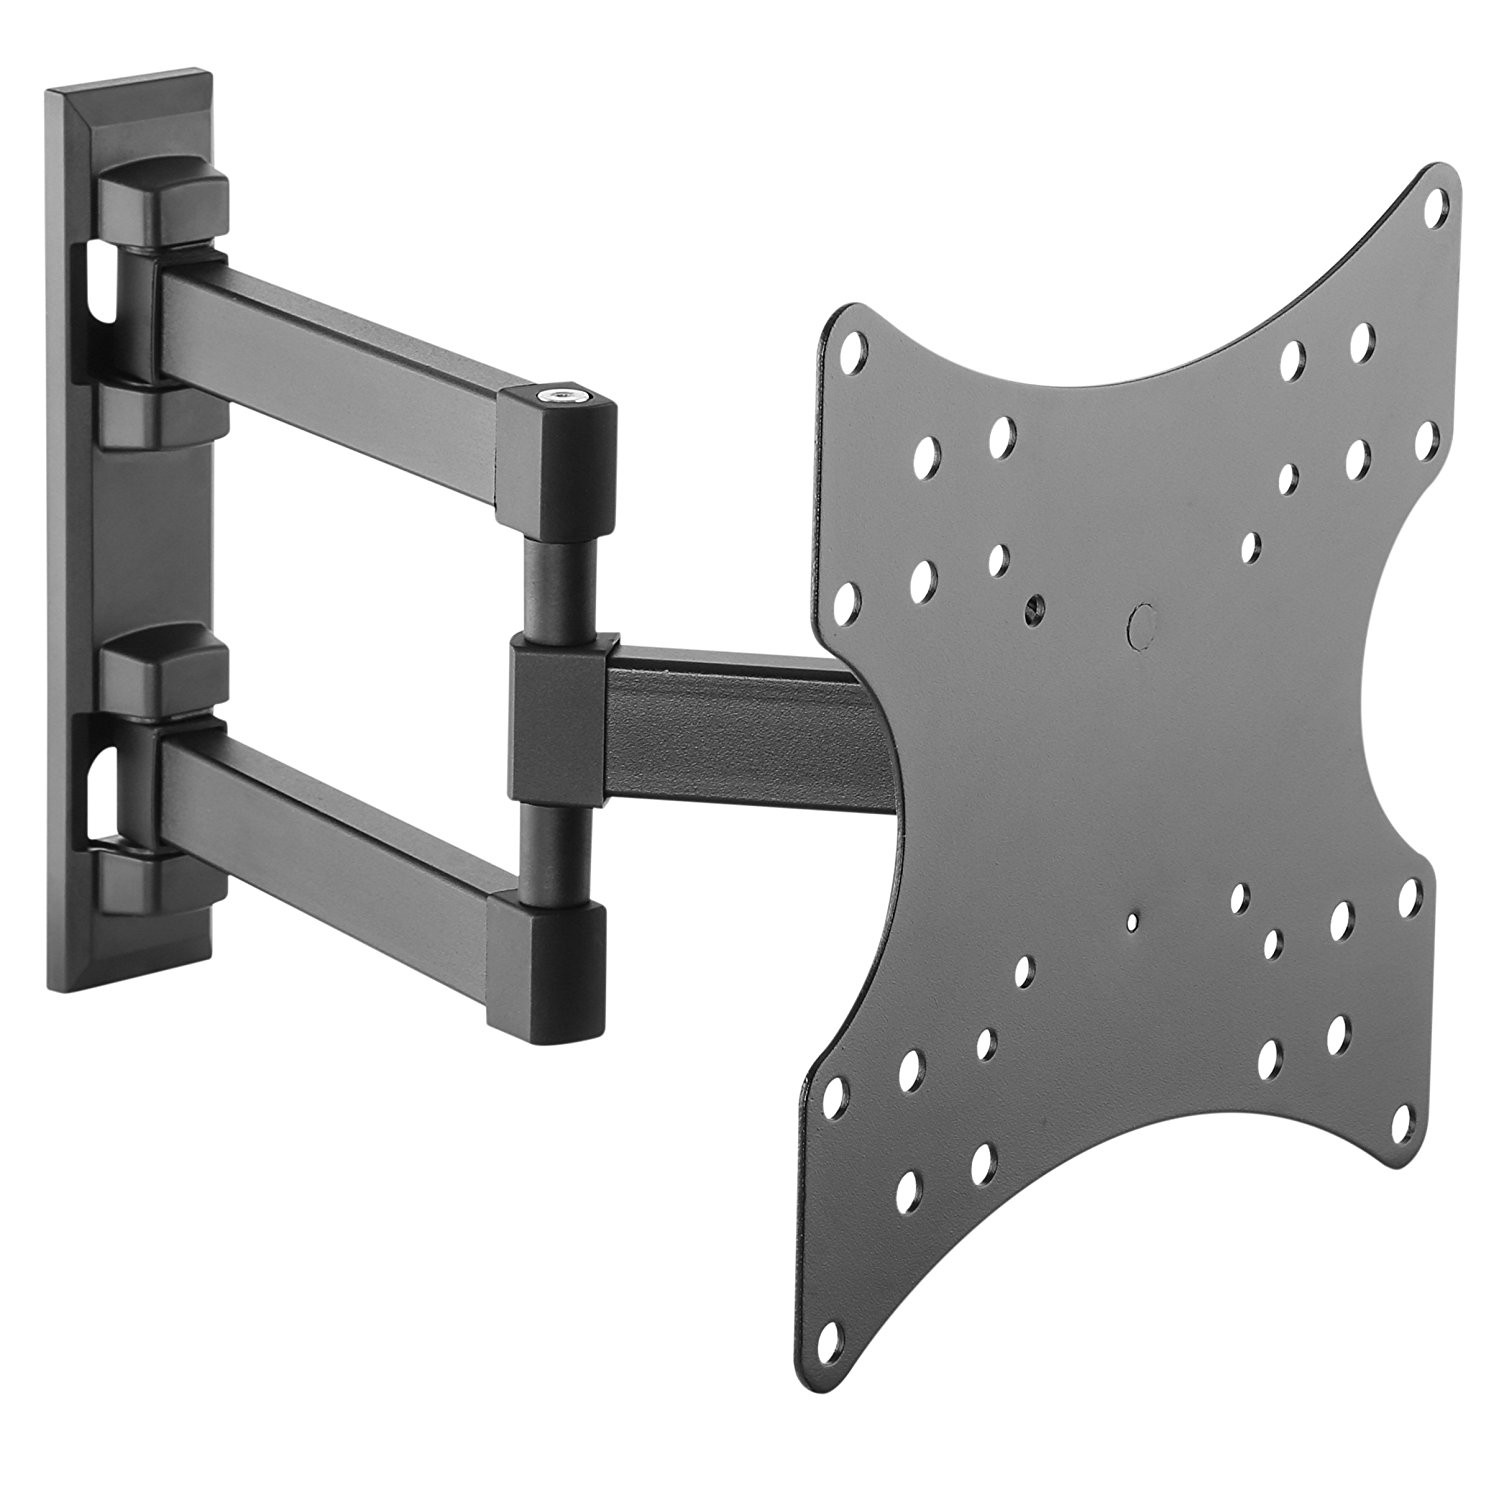 Duramex (TM) Cantilevel Mount for TV LED LCD Monitor Fully Adjustable upto 42" (Single Arm Monitor Wall Mount)